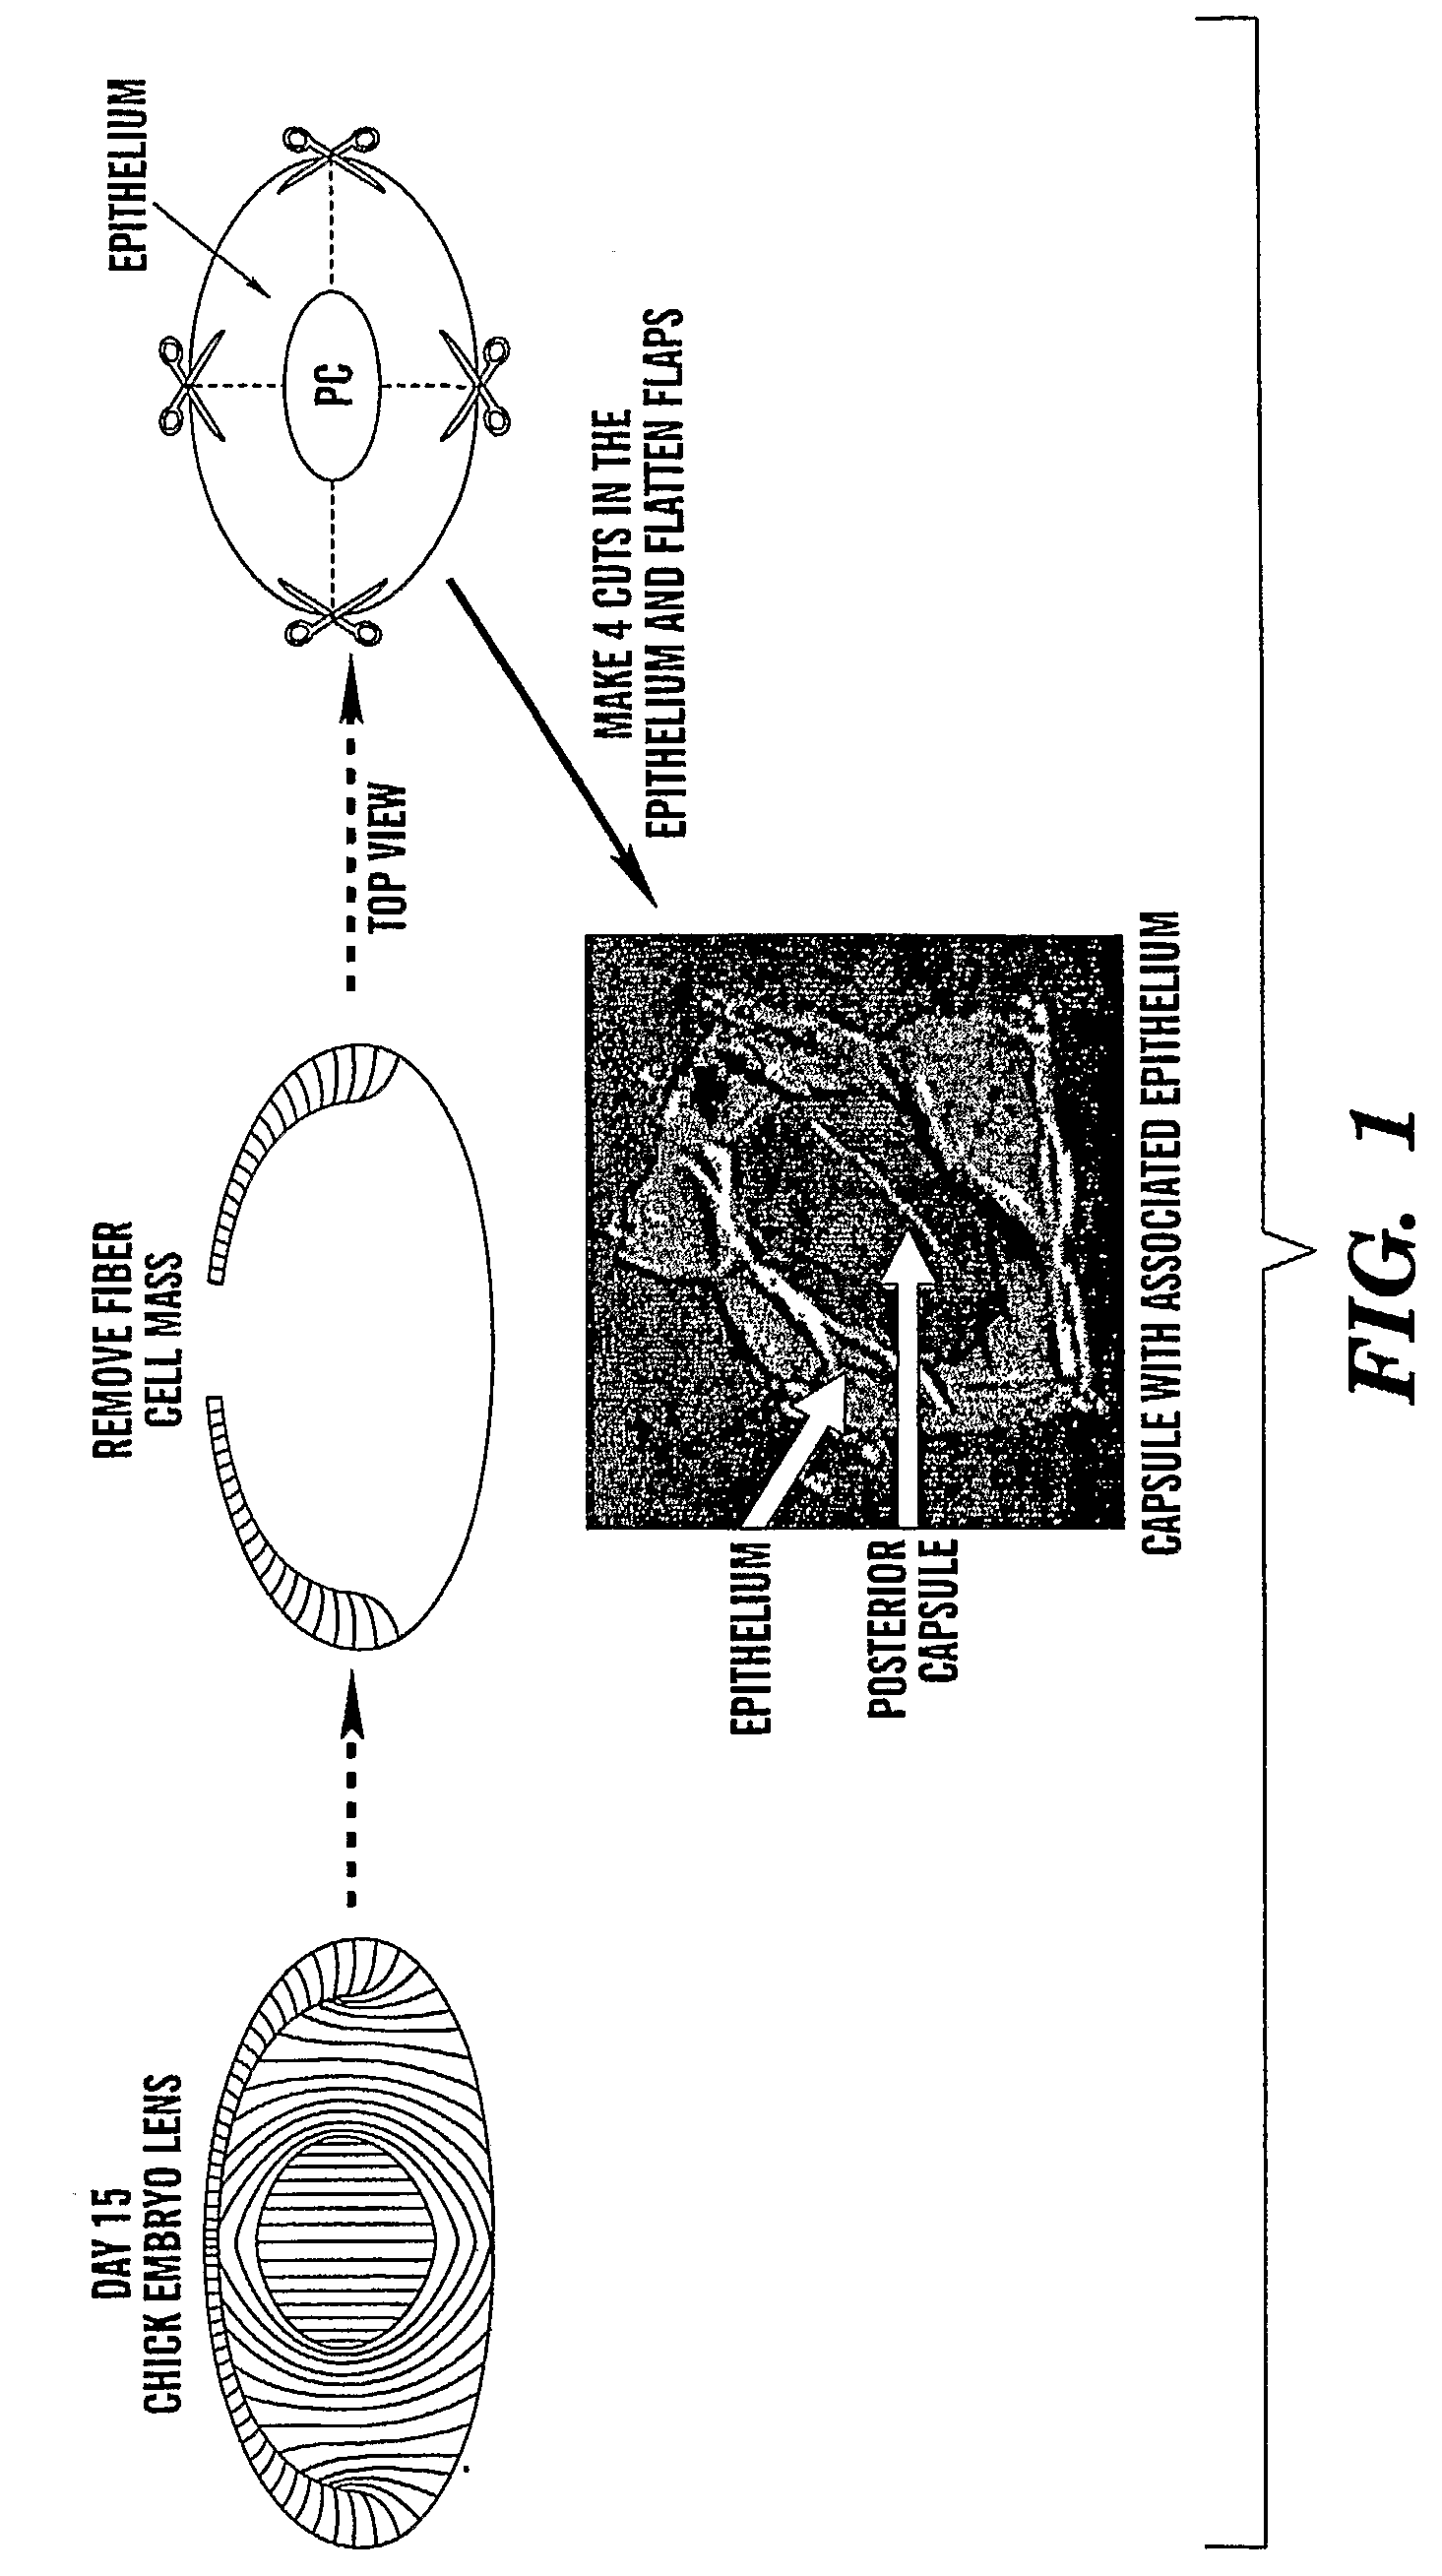 Method to Treat and Prevent Posterior Capsule Opacification